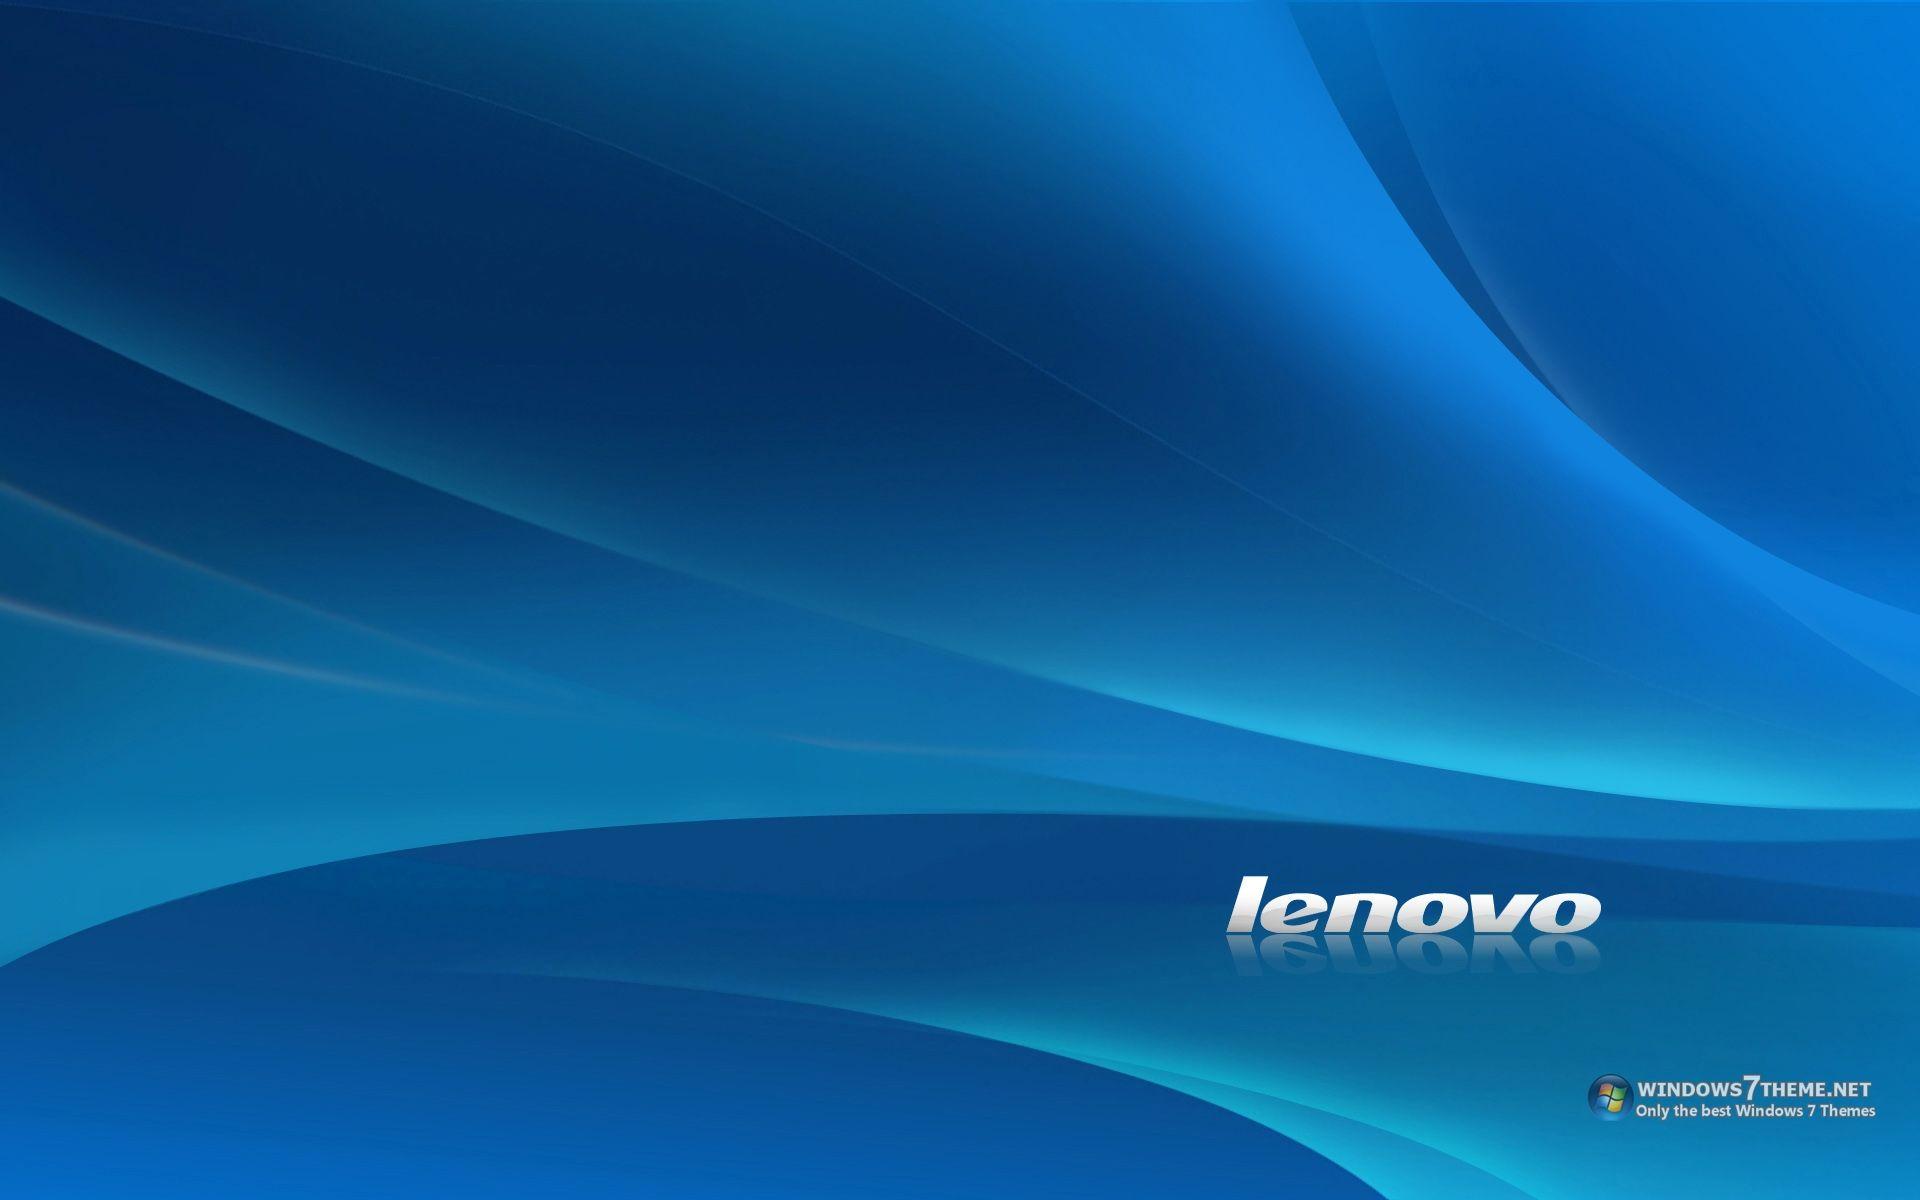 Lenovo Wallpapers Collection in HD for Download